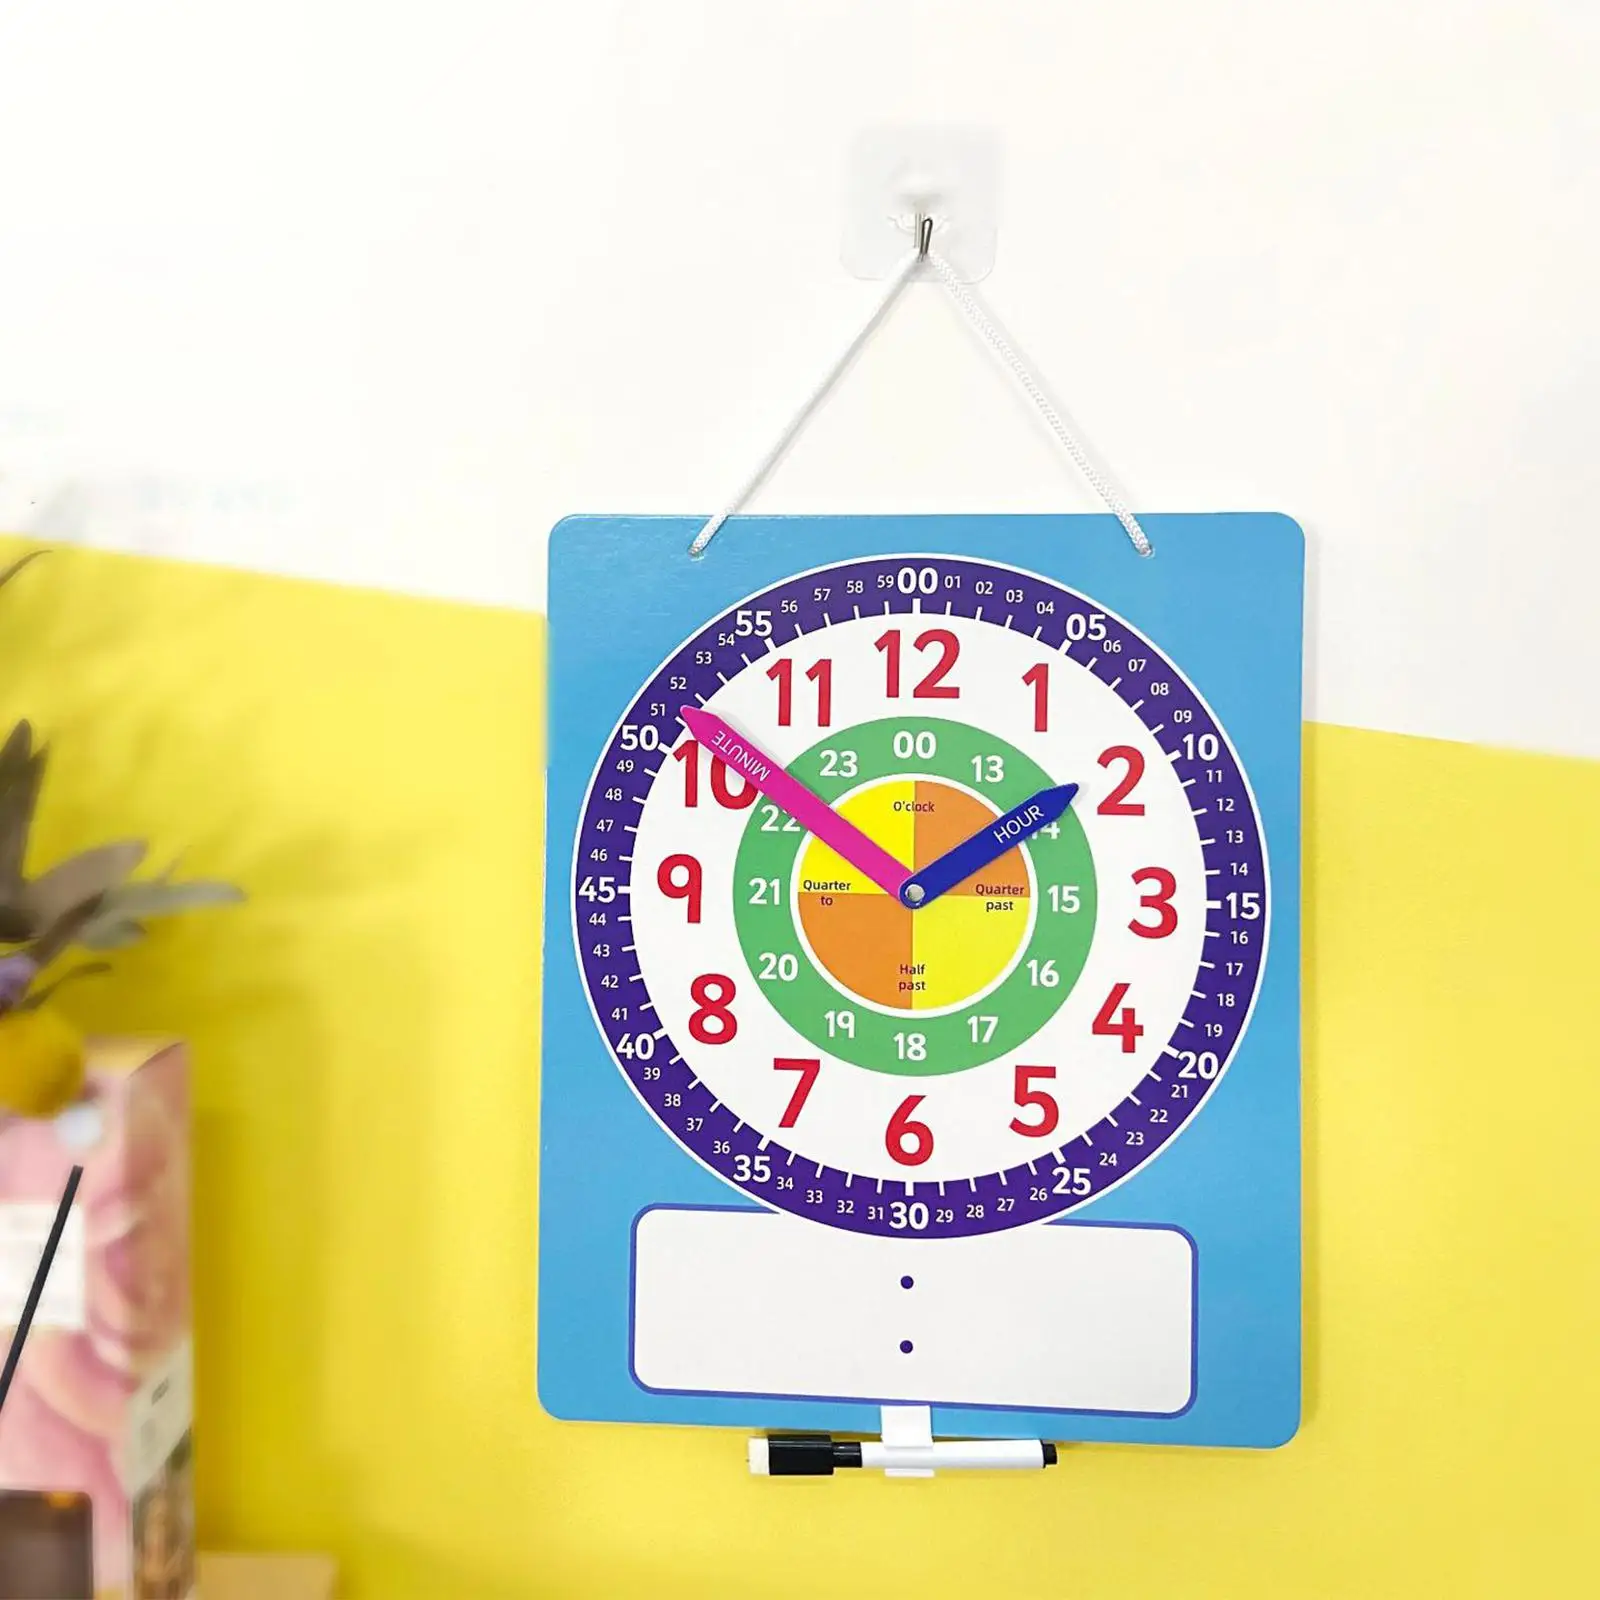 Paper Clock Teaching Time Montessori Early Learning Math Toy for Homeschool